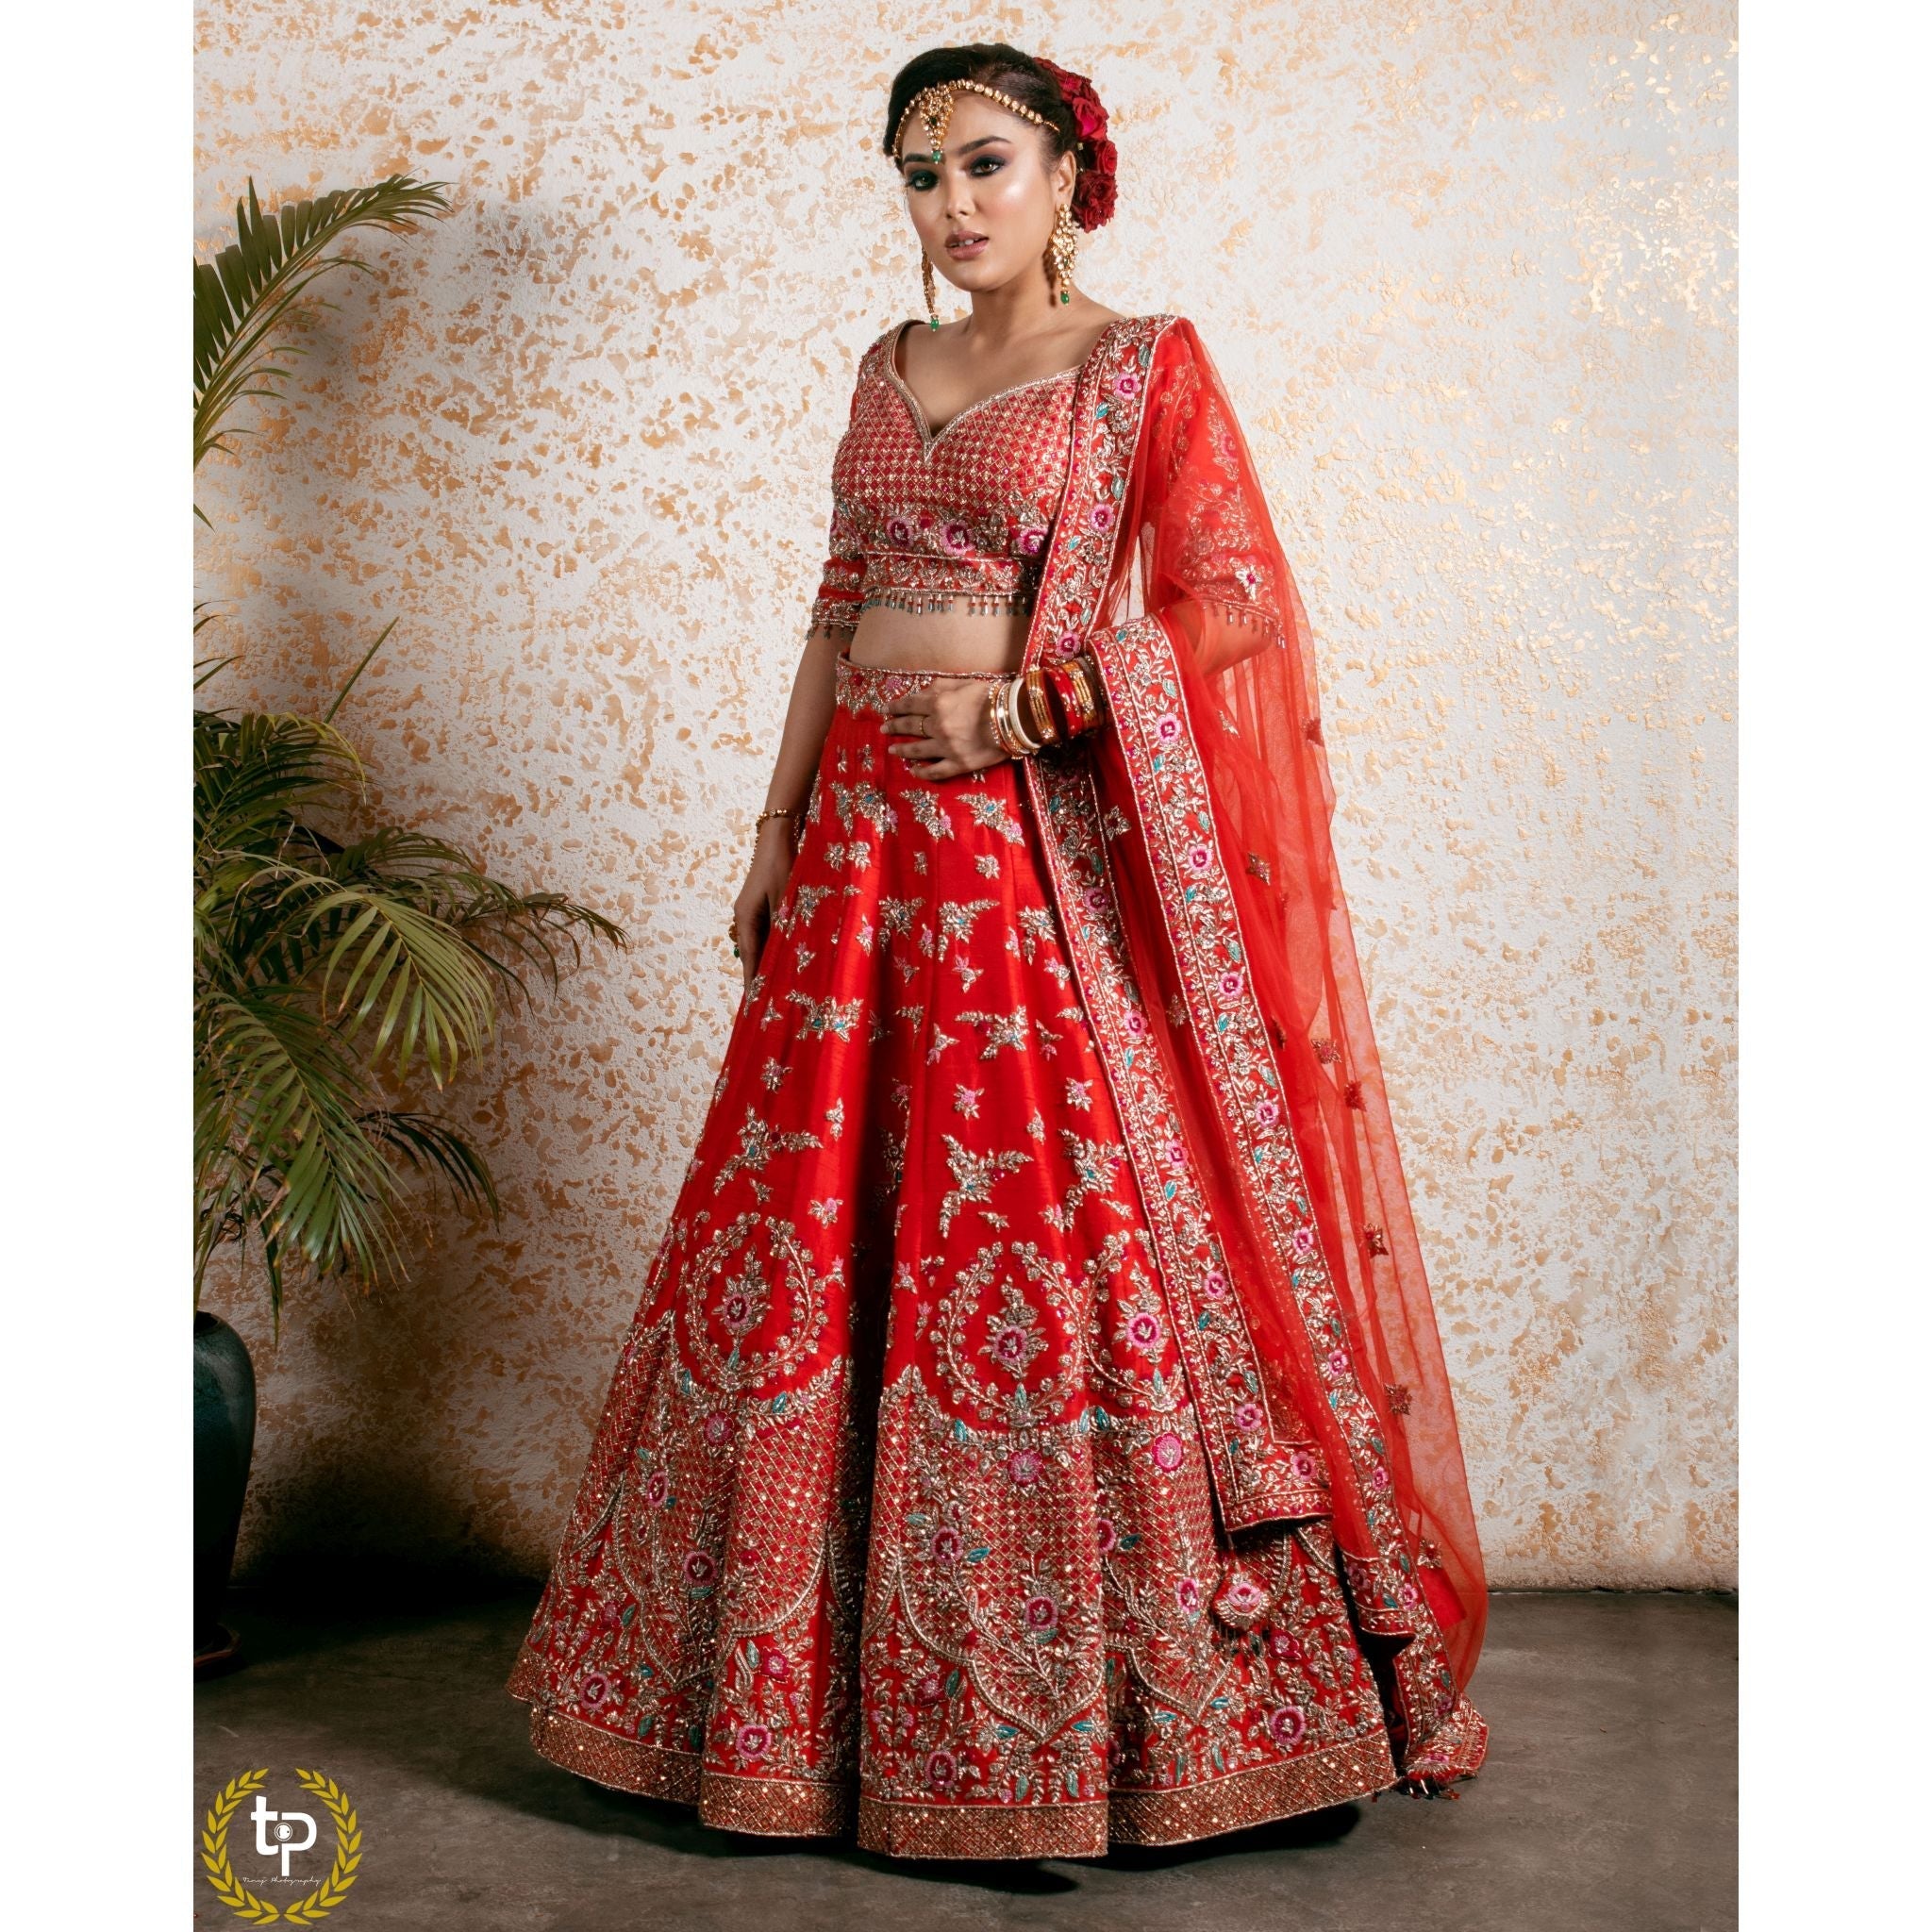 Vermillion Red Abstract Red Lehenga Set - Indian Designer Bridal Wedding Outfit